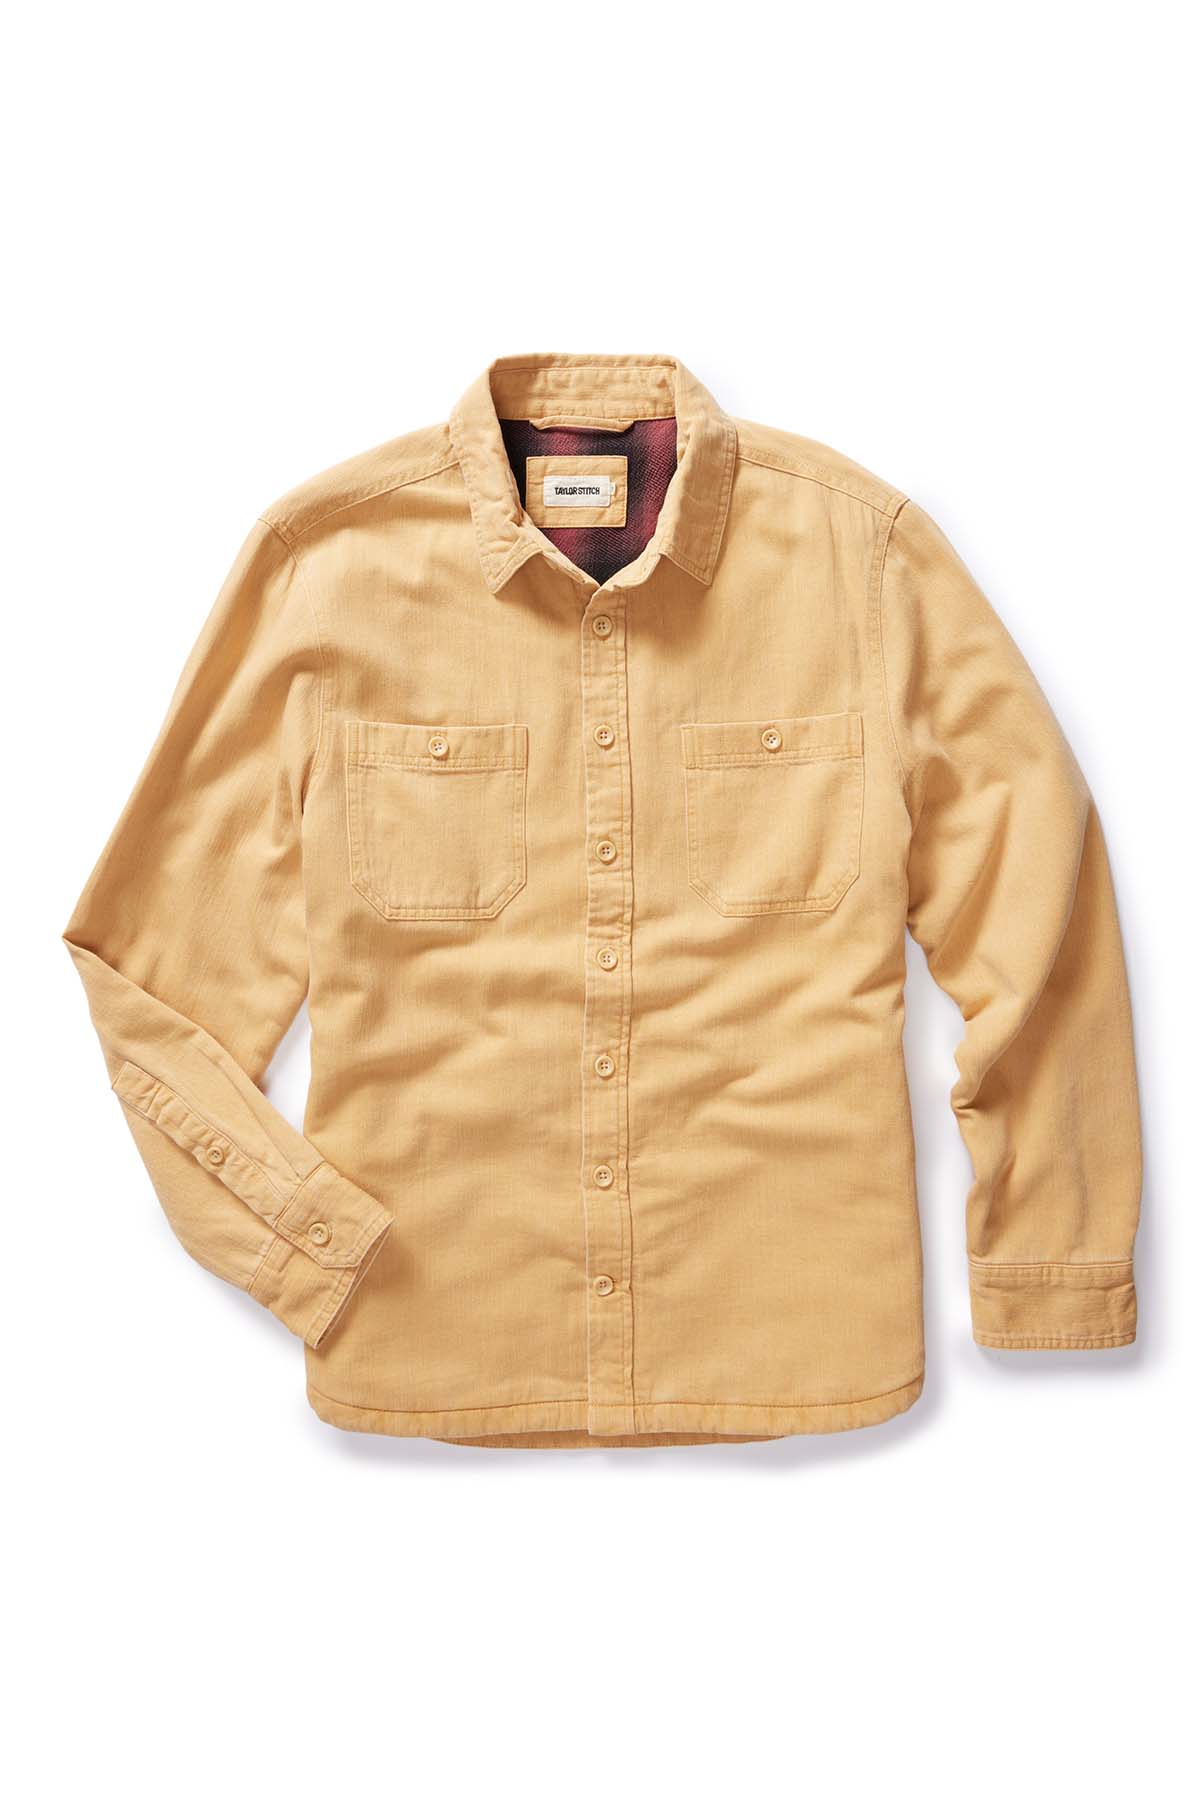 Taylor Stitch - Lined Utility Shirt - Wheat Denim - Front